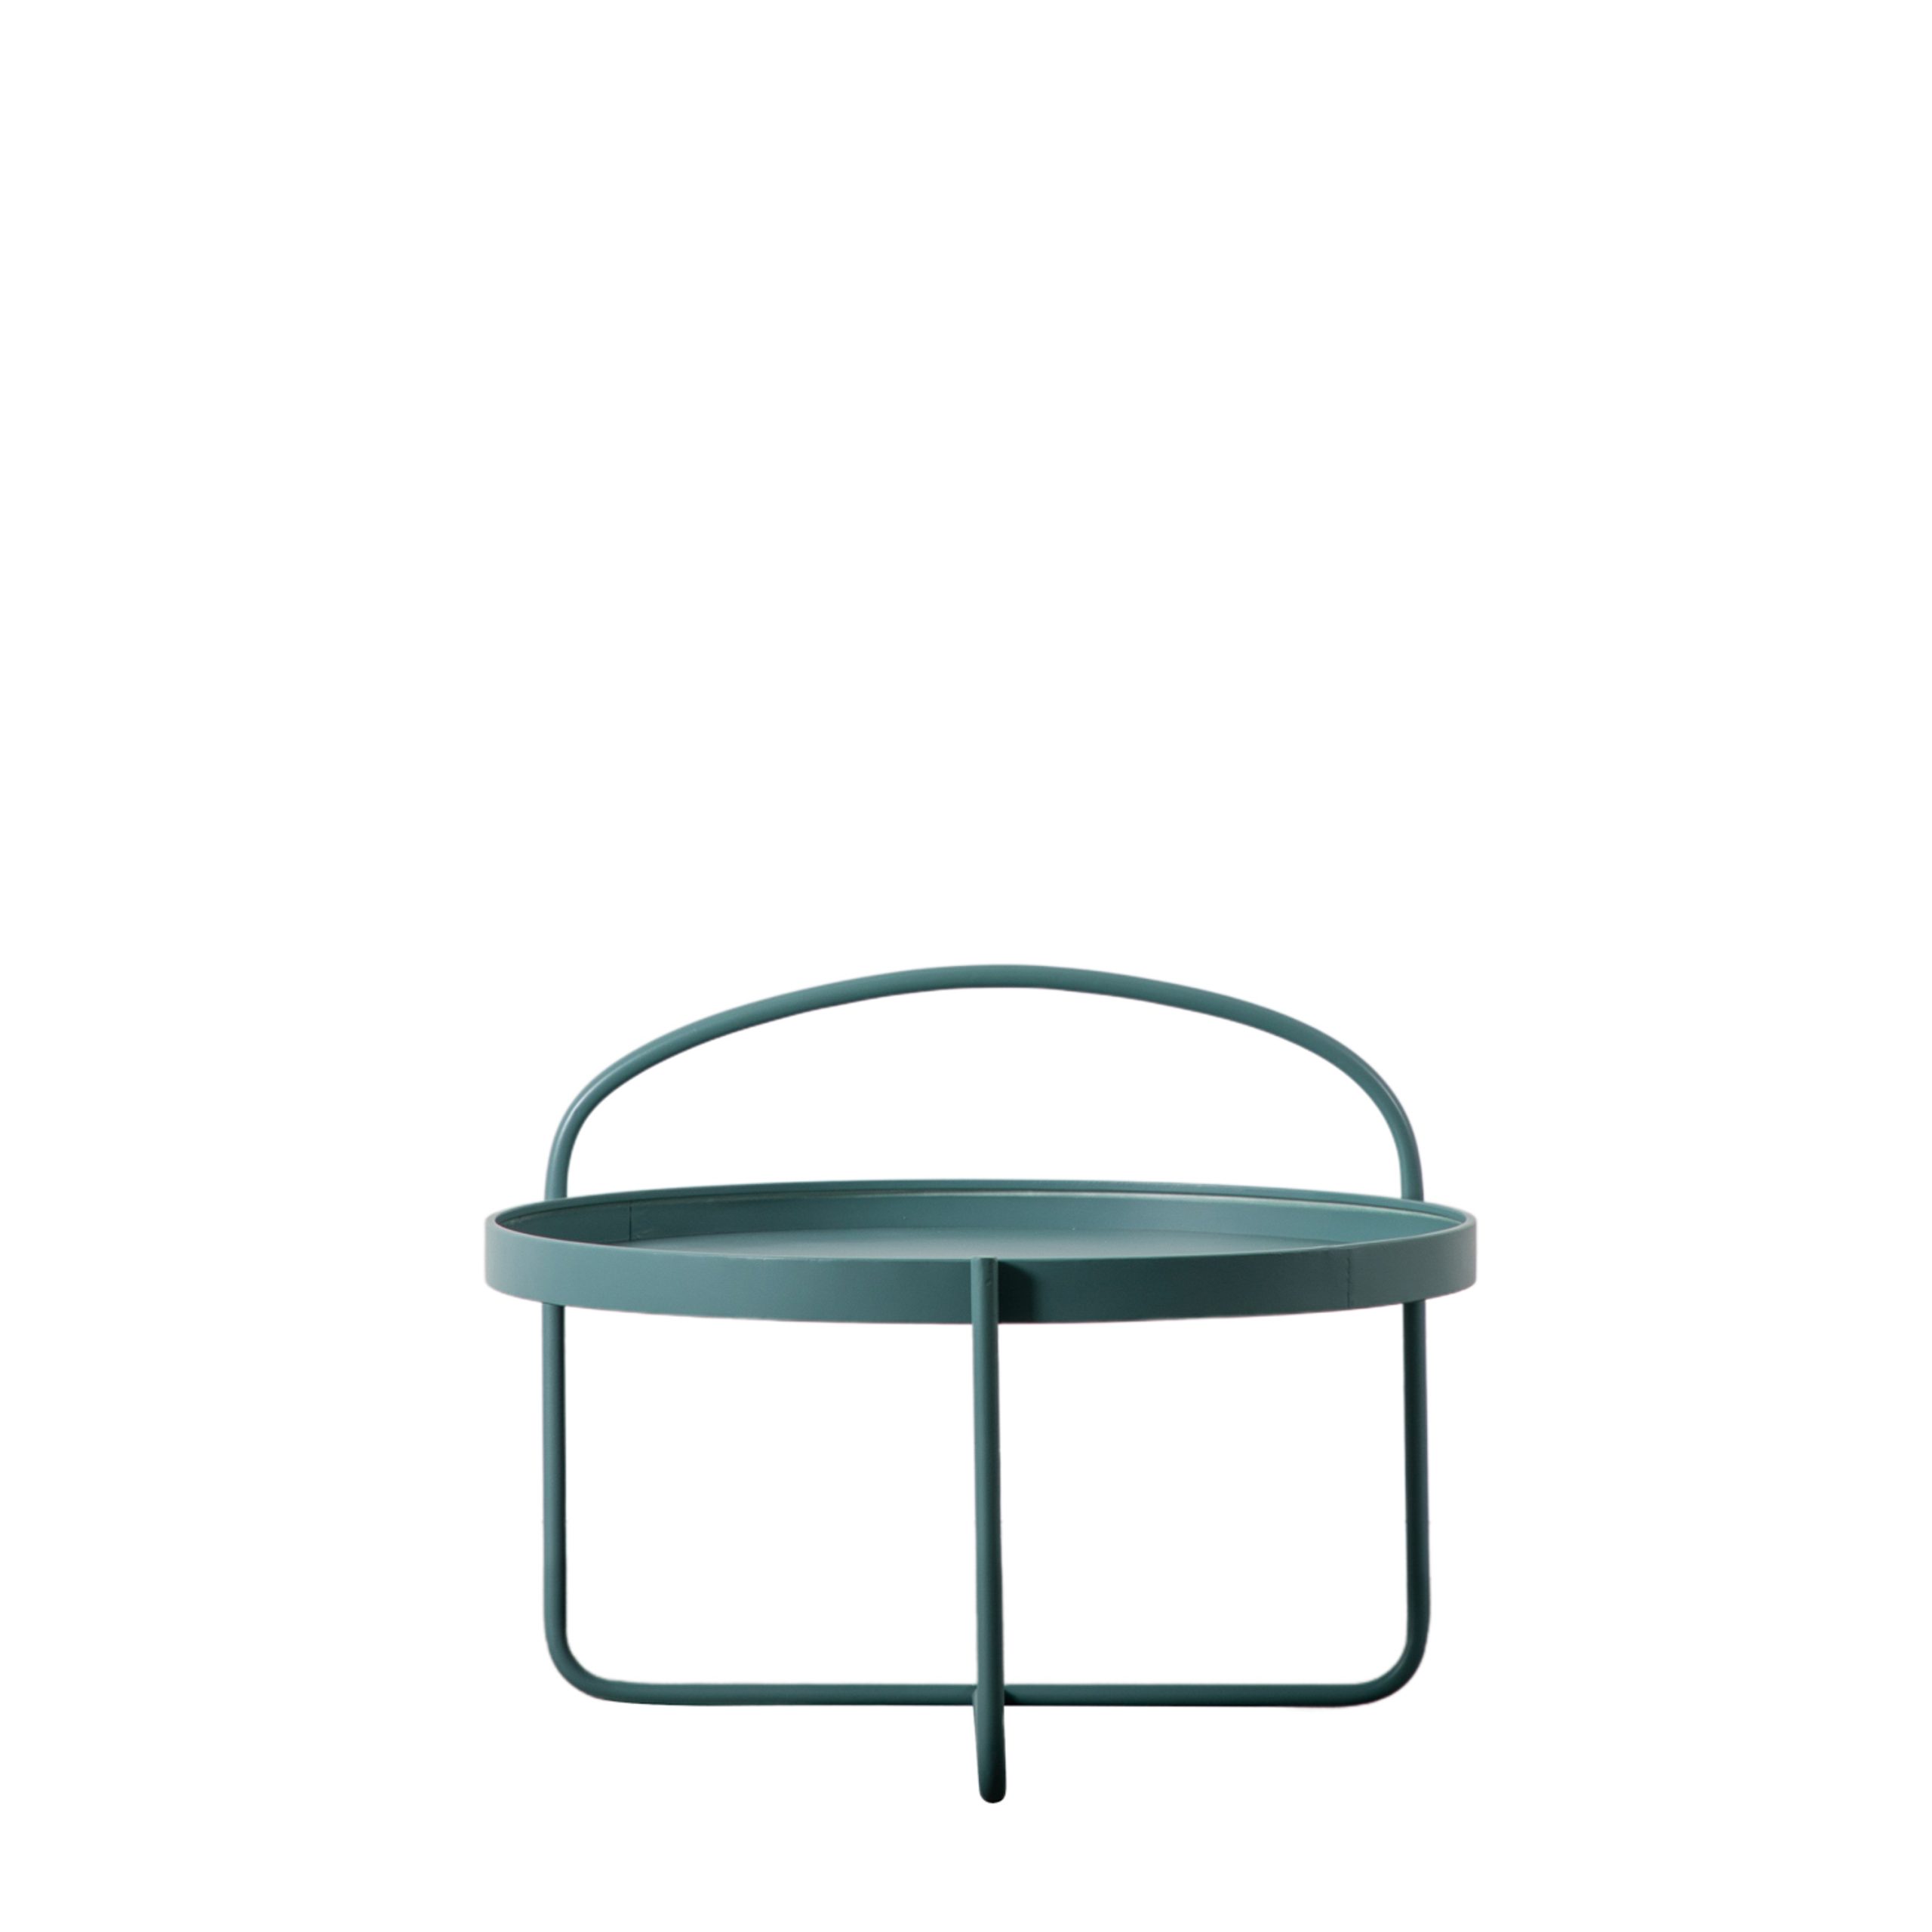 Gallery Direct Melbury Coffee Table Teal